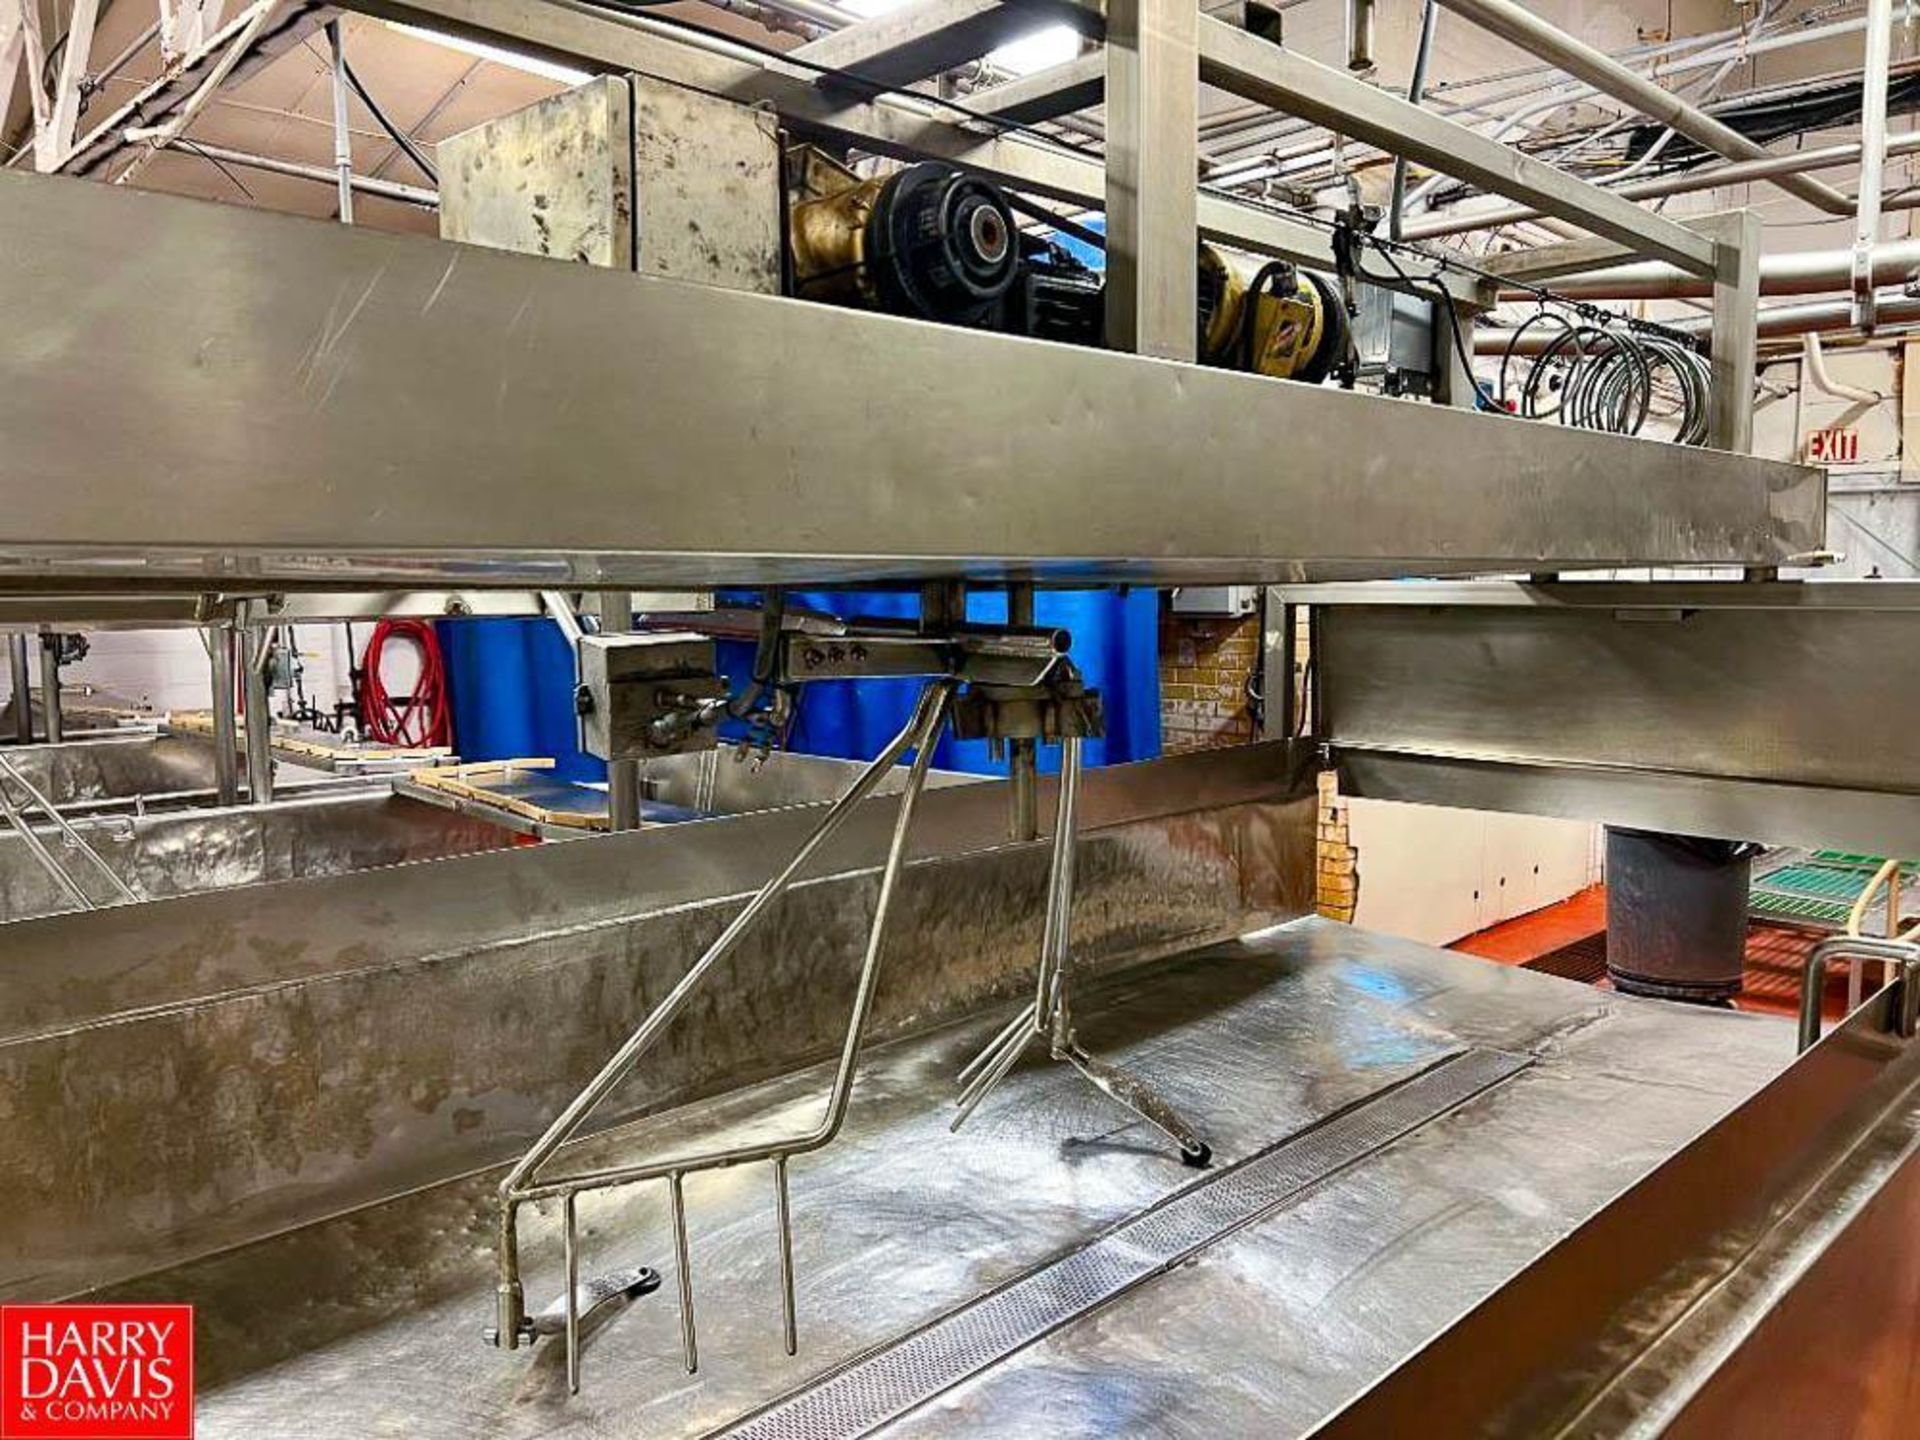 S/S Vat with Carriage, Agitation Knives and Allen-Bradley Controls, Dimensions = 45' x 69" - Image 2 of 2